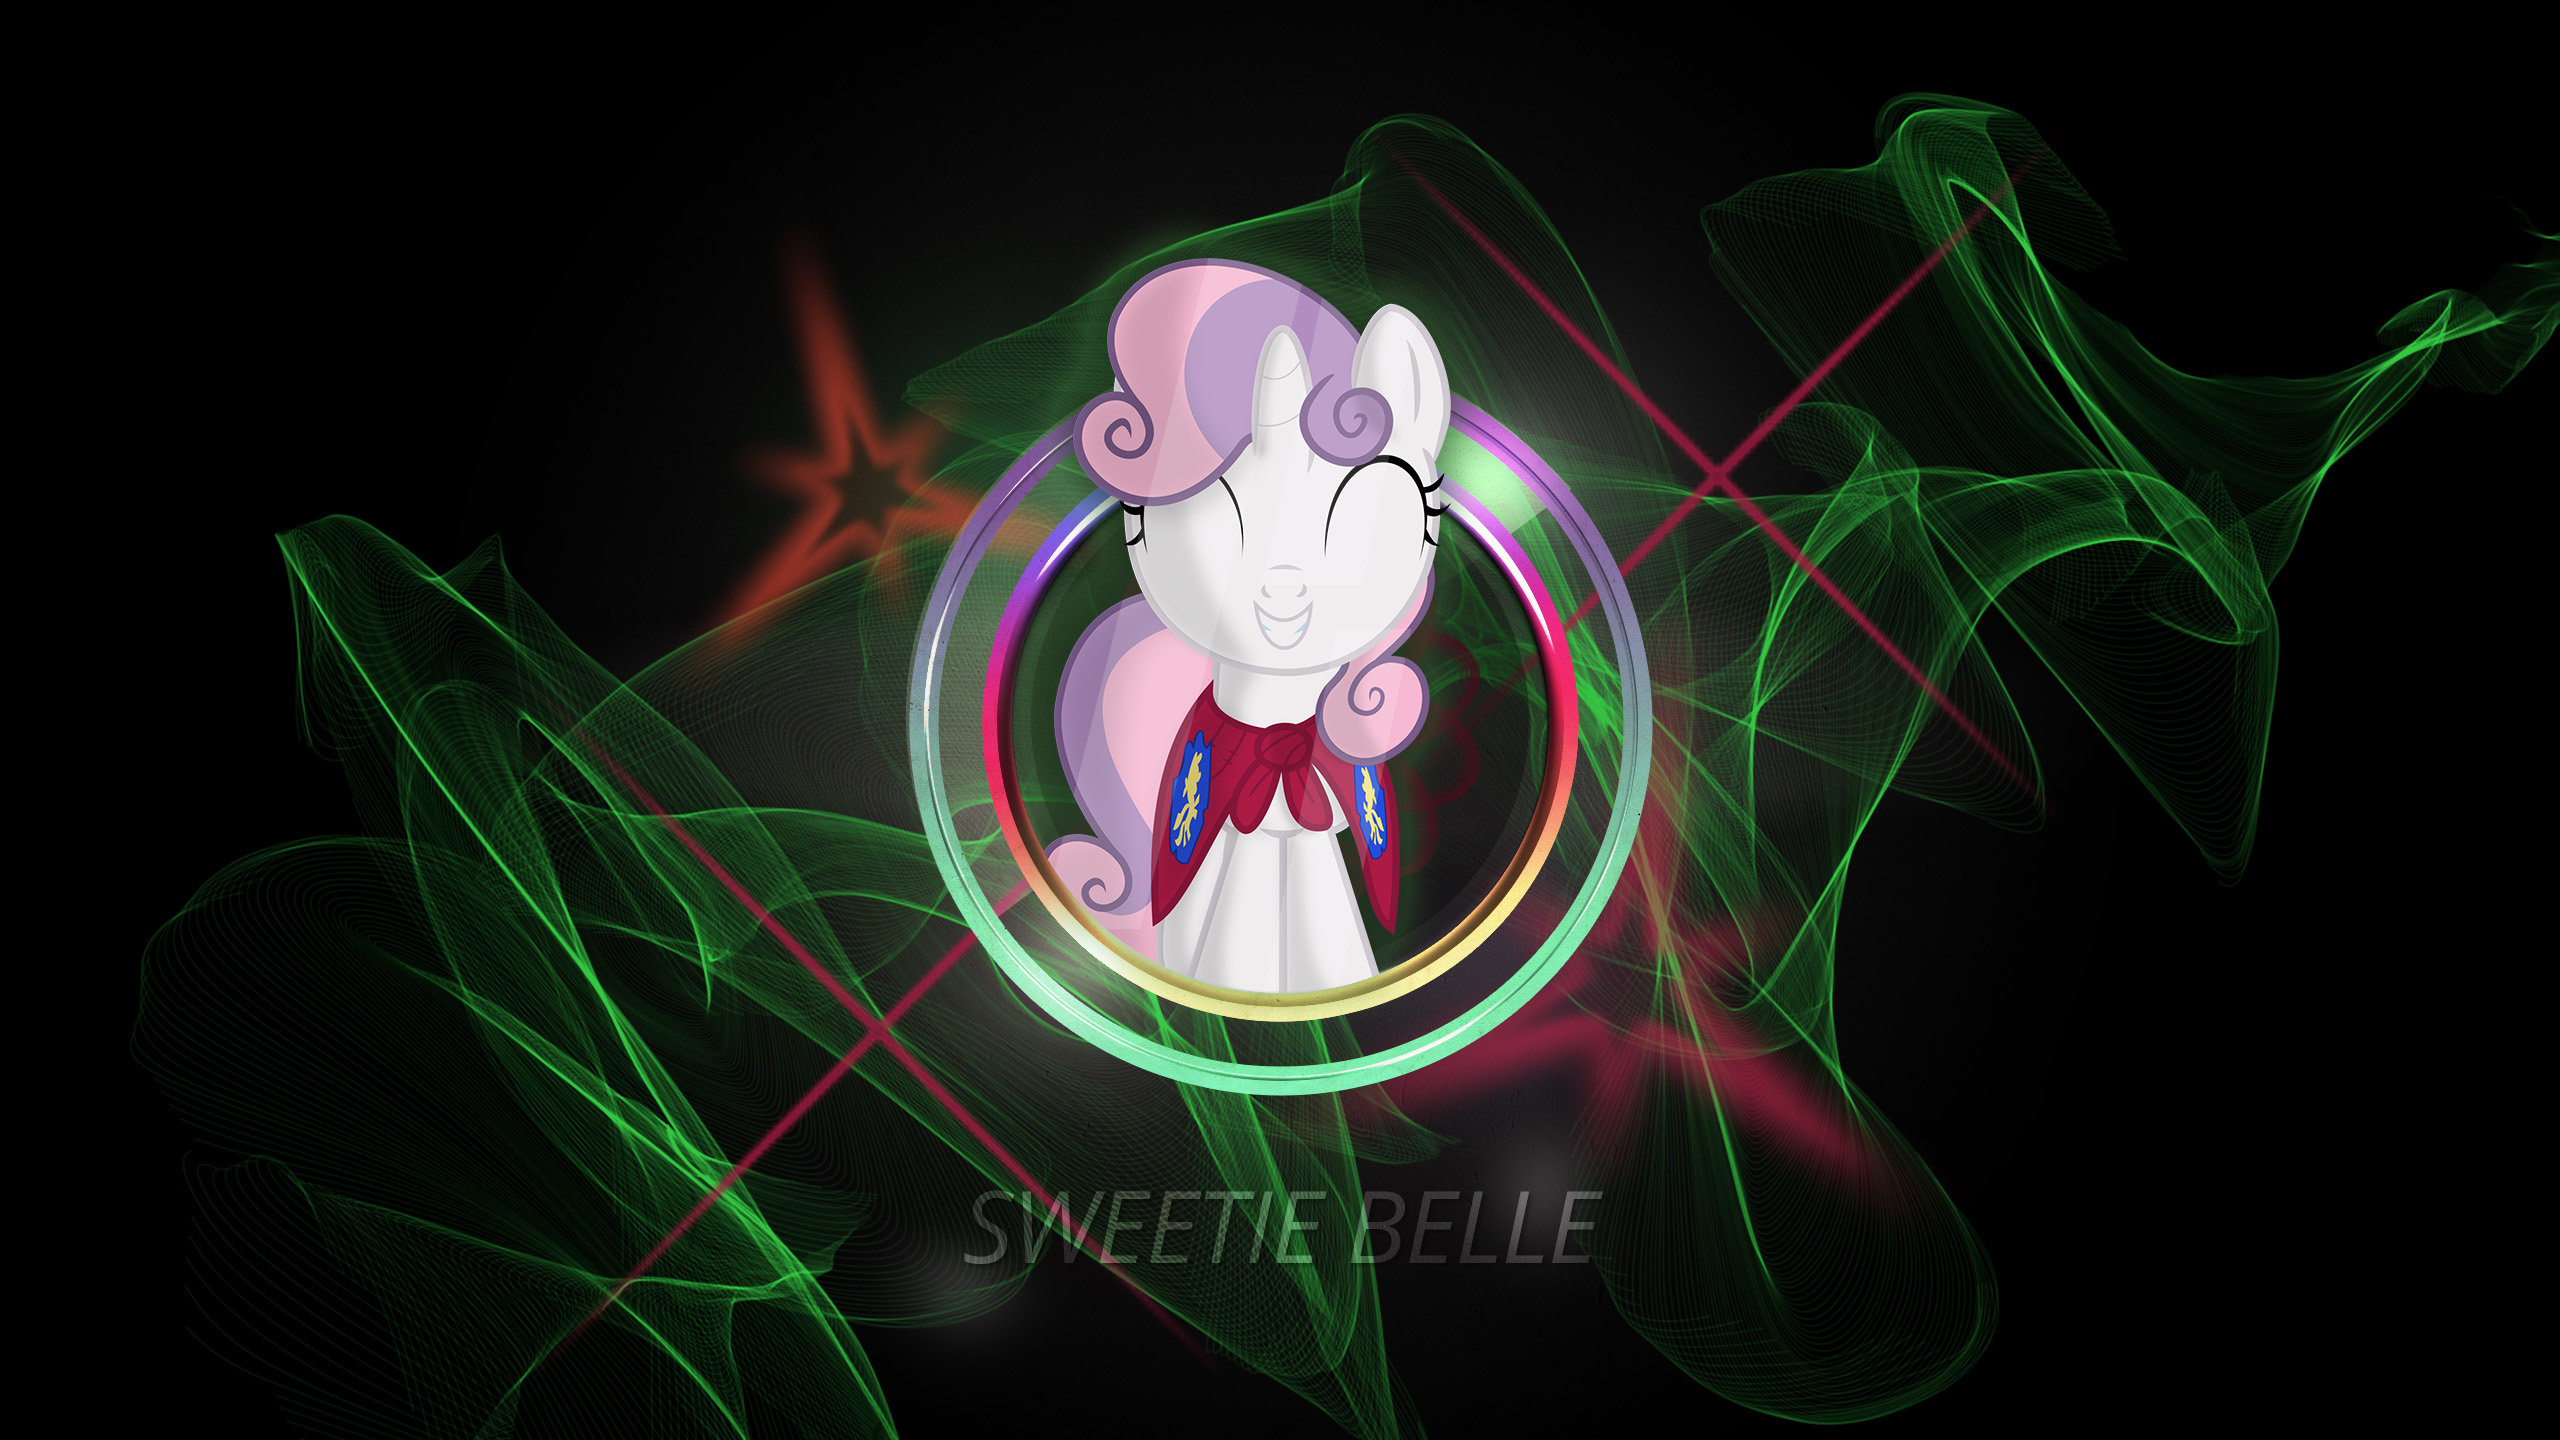 Awesome Sweetie Belle free wallpaper ID:154537 for hd 2560x1440 PC